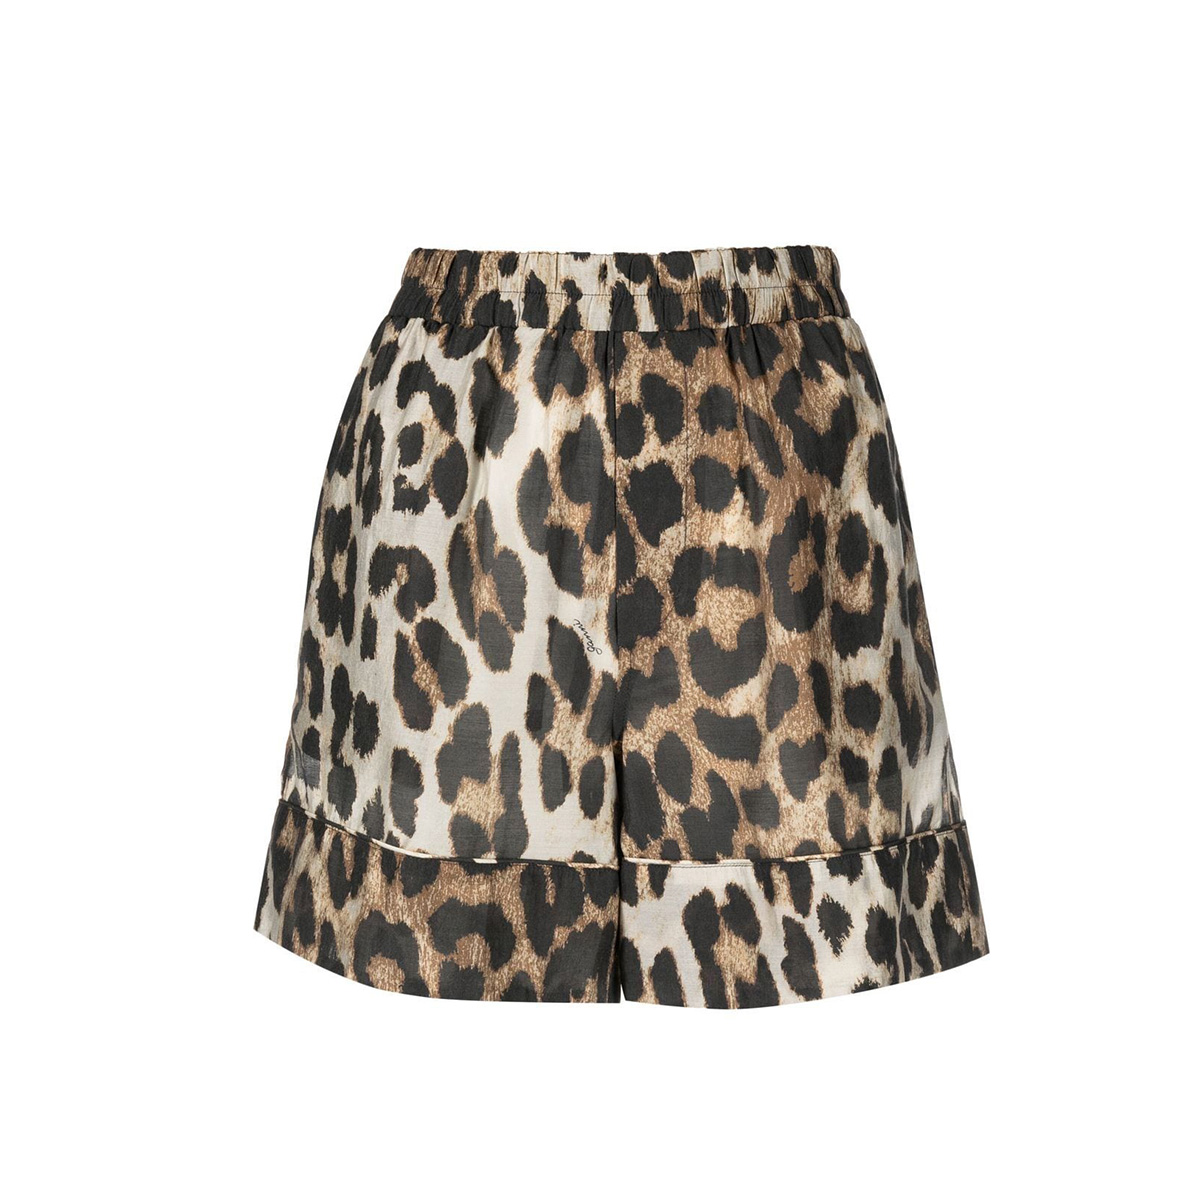 The Fashion Crowd Has Spoken–Longline Shorts Are Totally In | Who What Wear